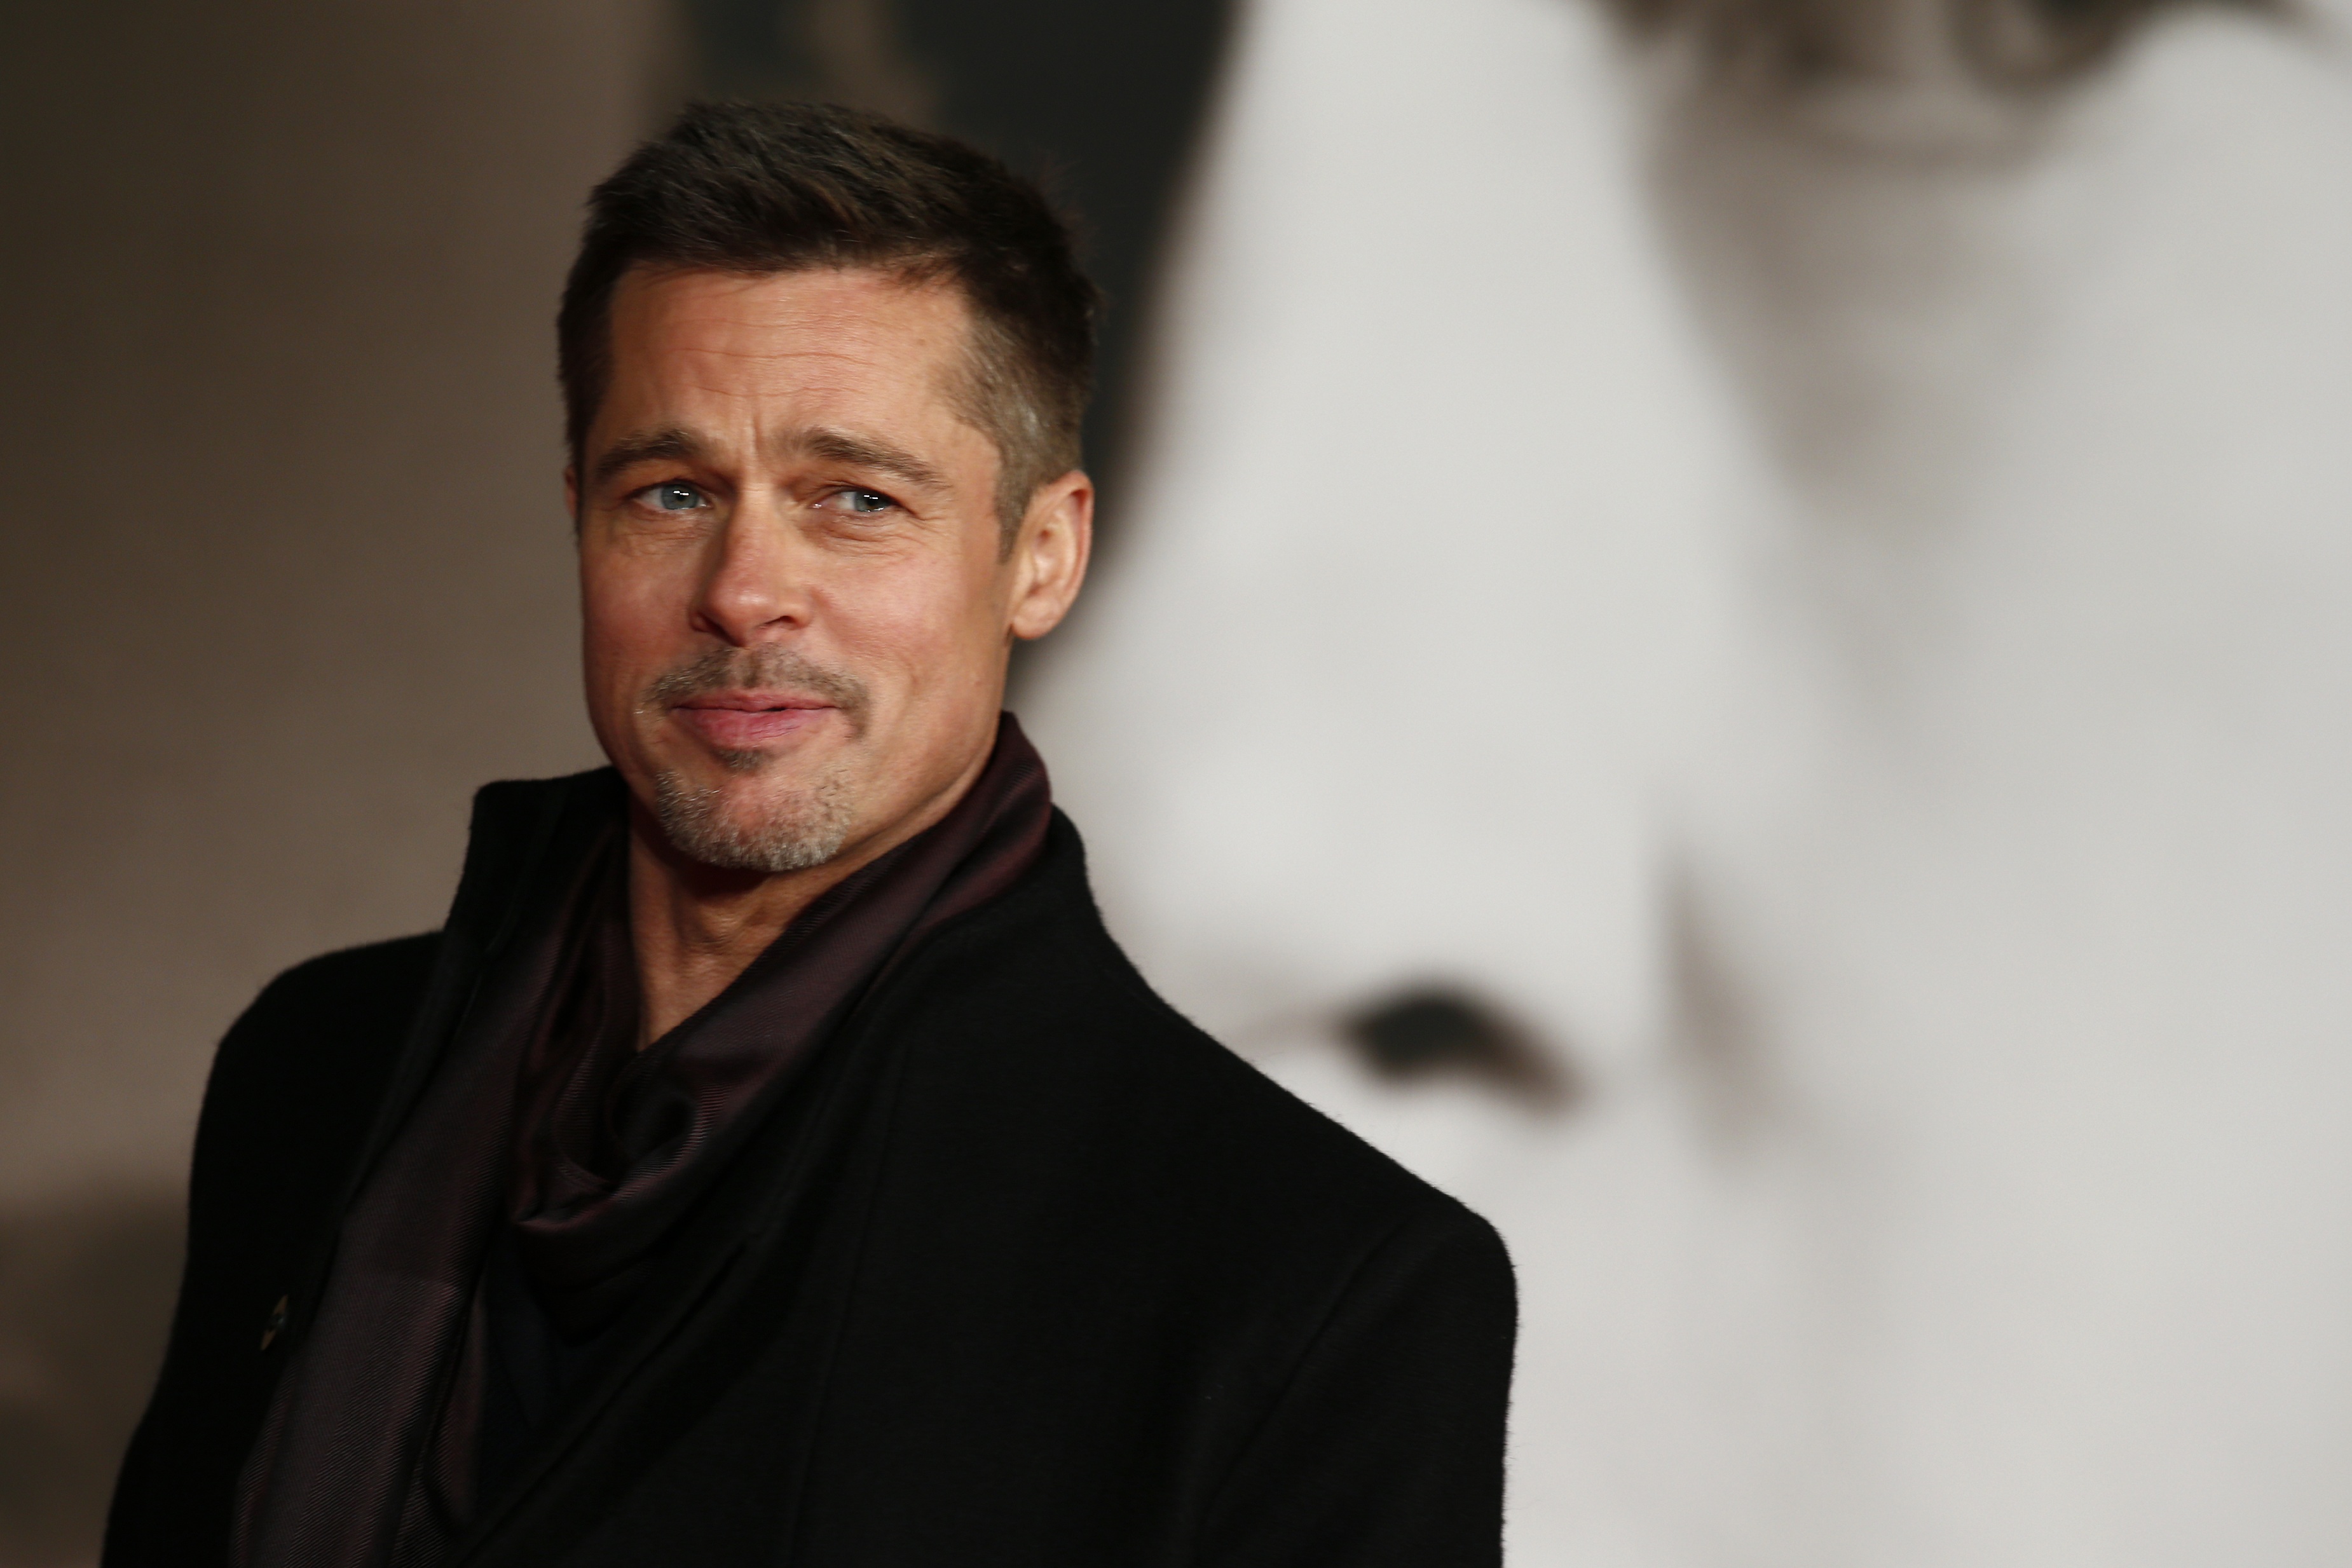 US actor Brad Pitt poses for photographers after arriving to attend the UK premiere of the film 'Allied' in Leicester Square, central London on November 21, 2016.  / AFP PHOTO / Adrian DENNIS